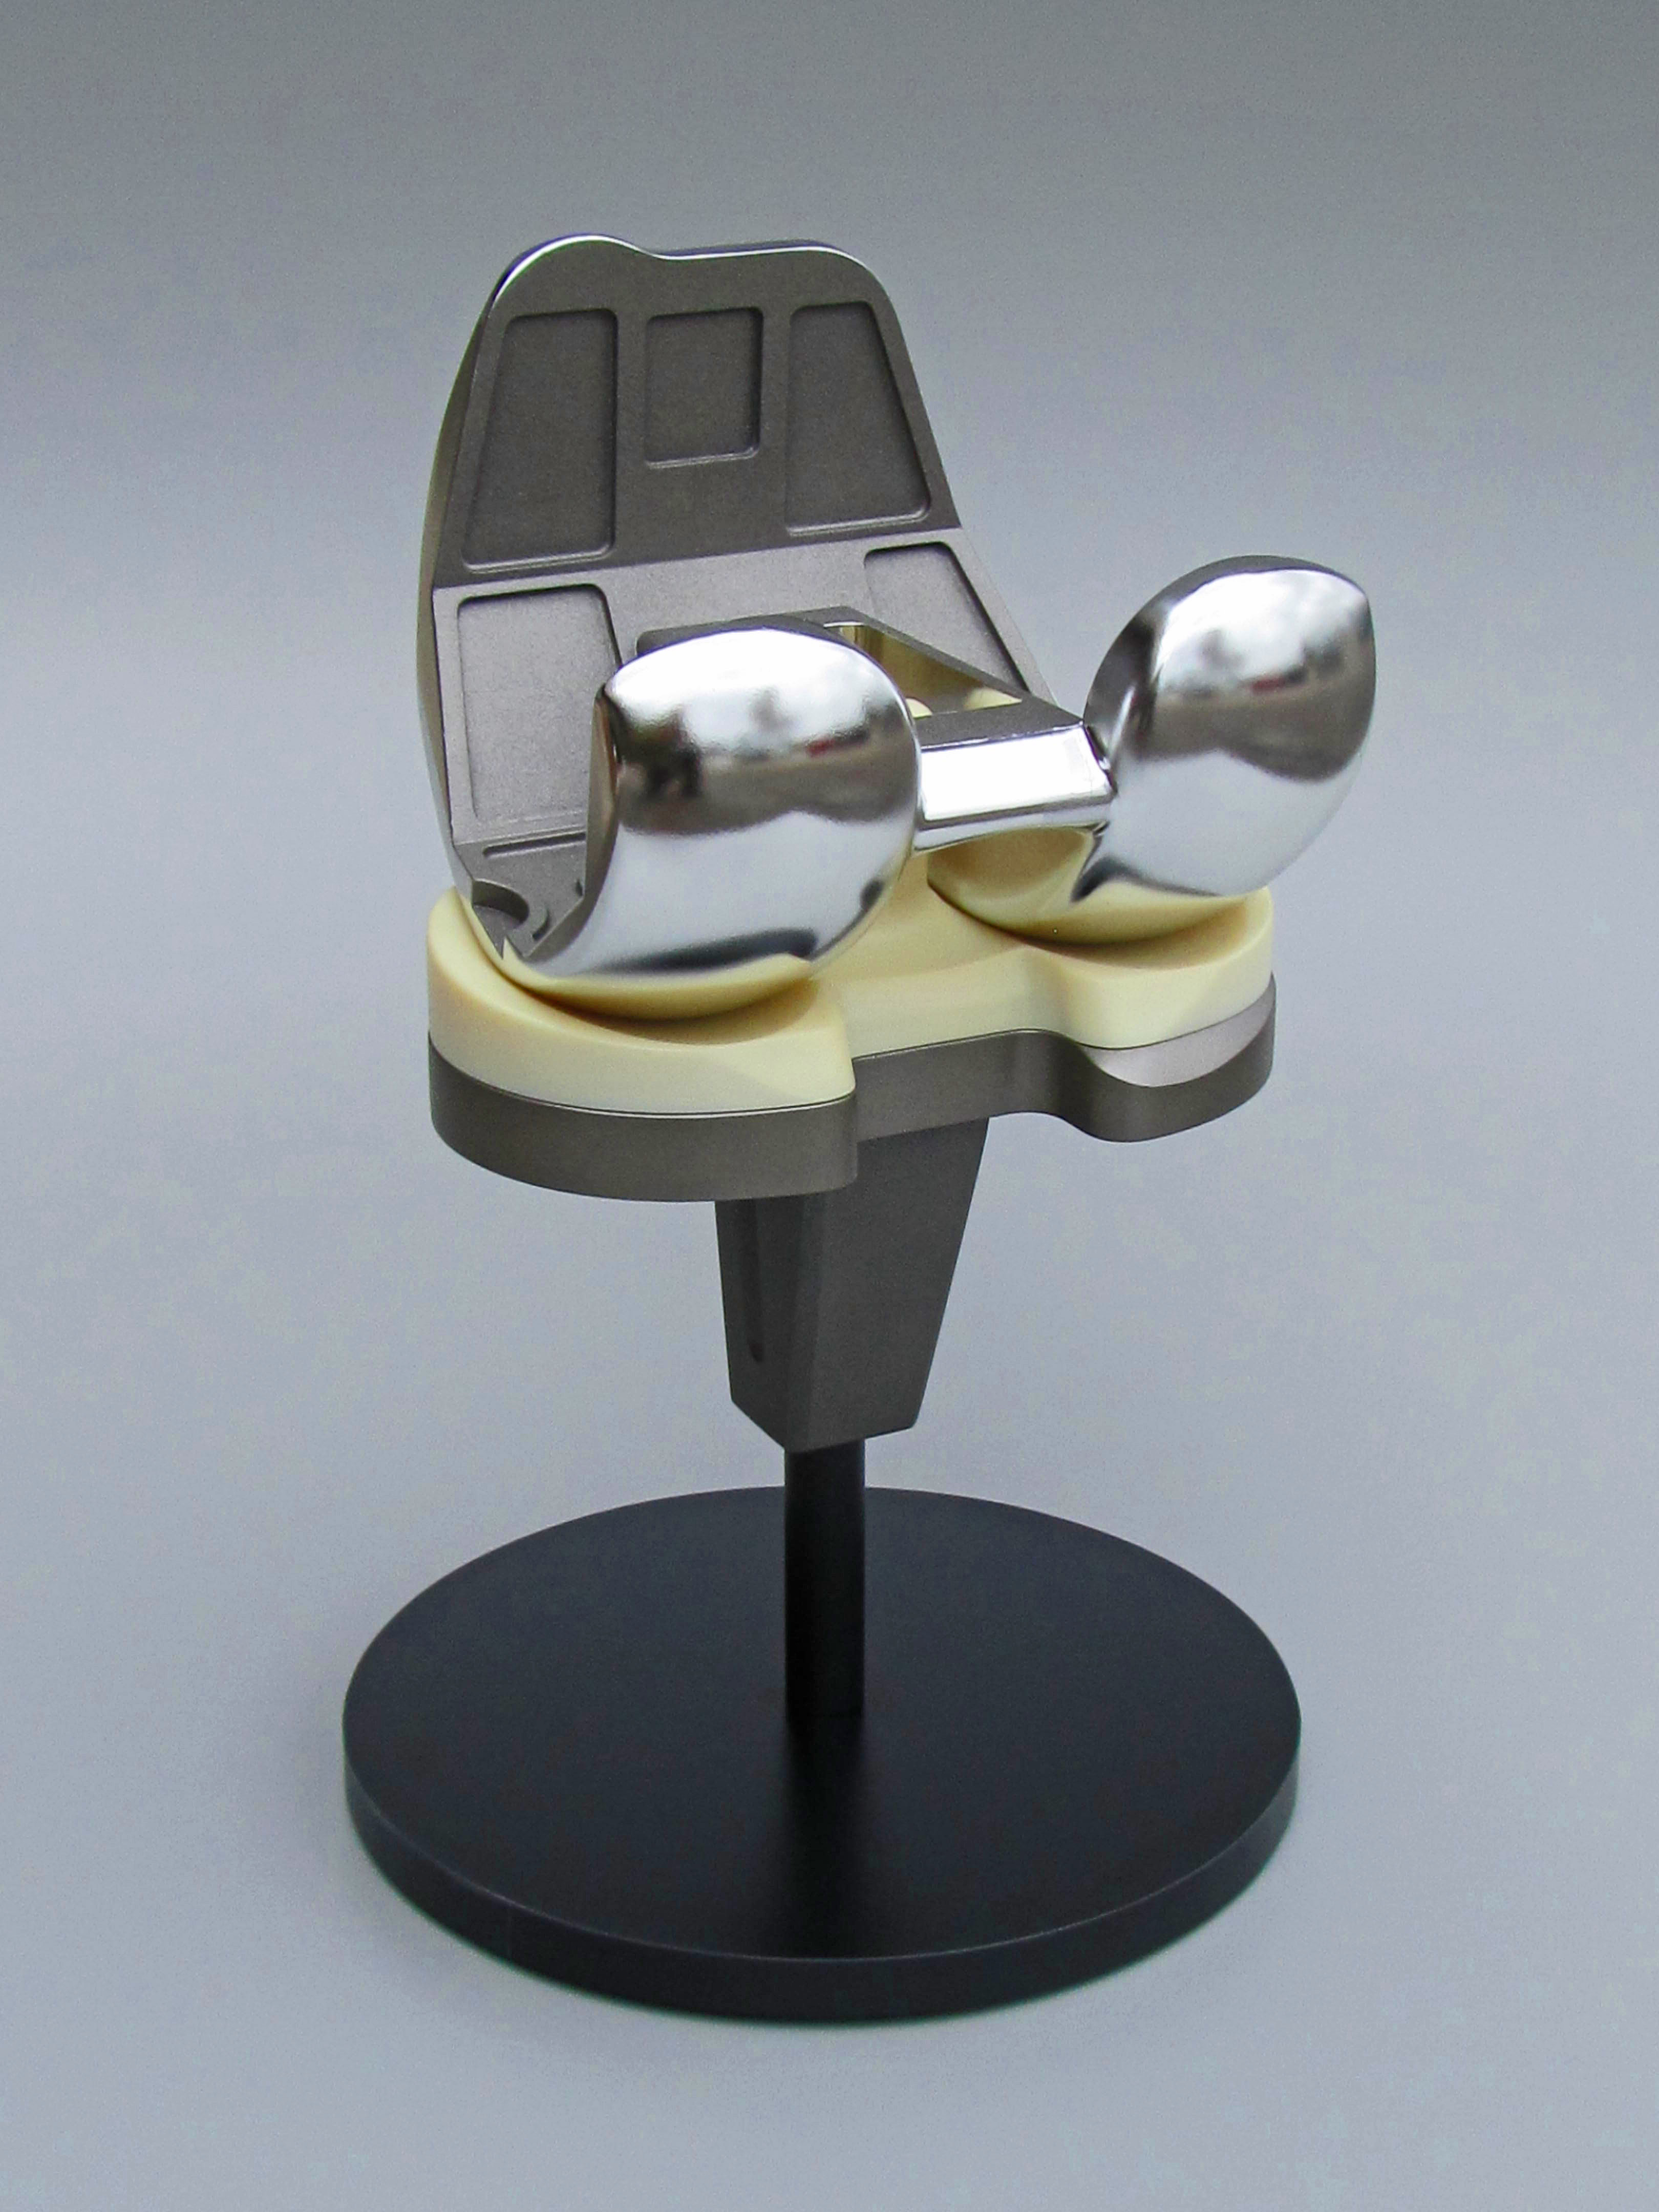 Product Model Knee Implant